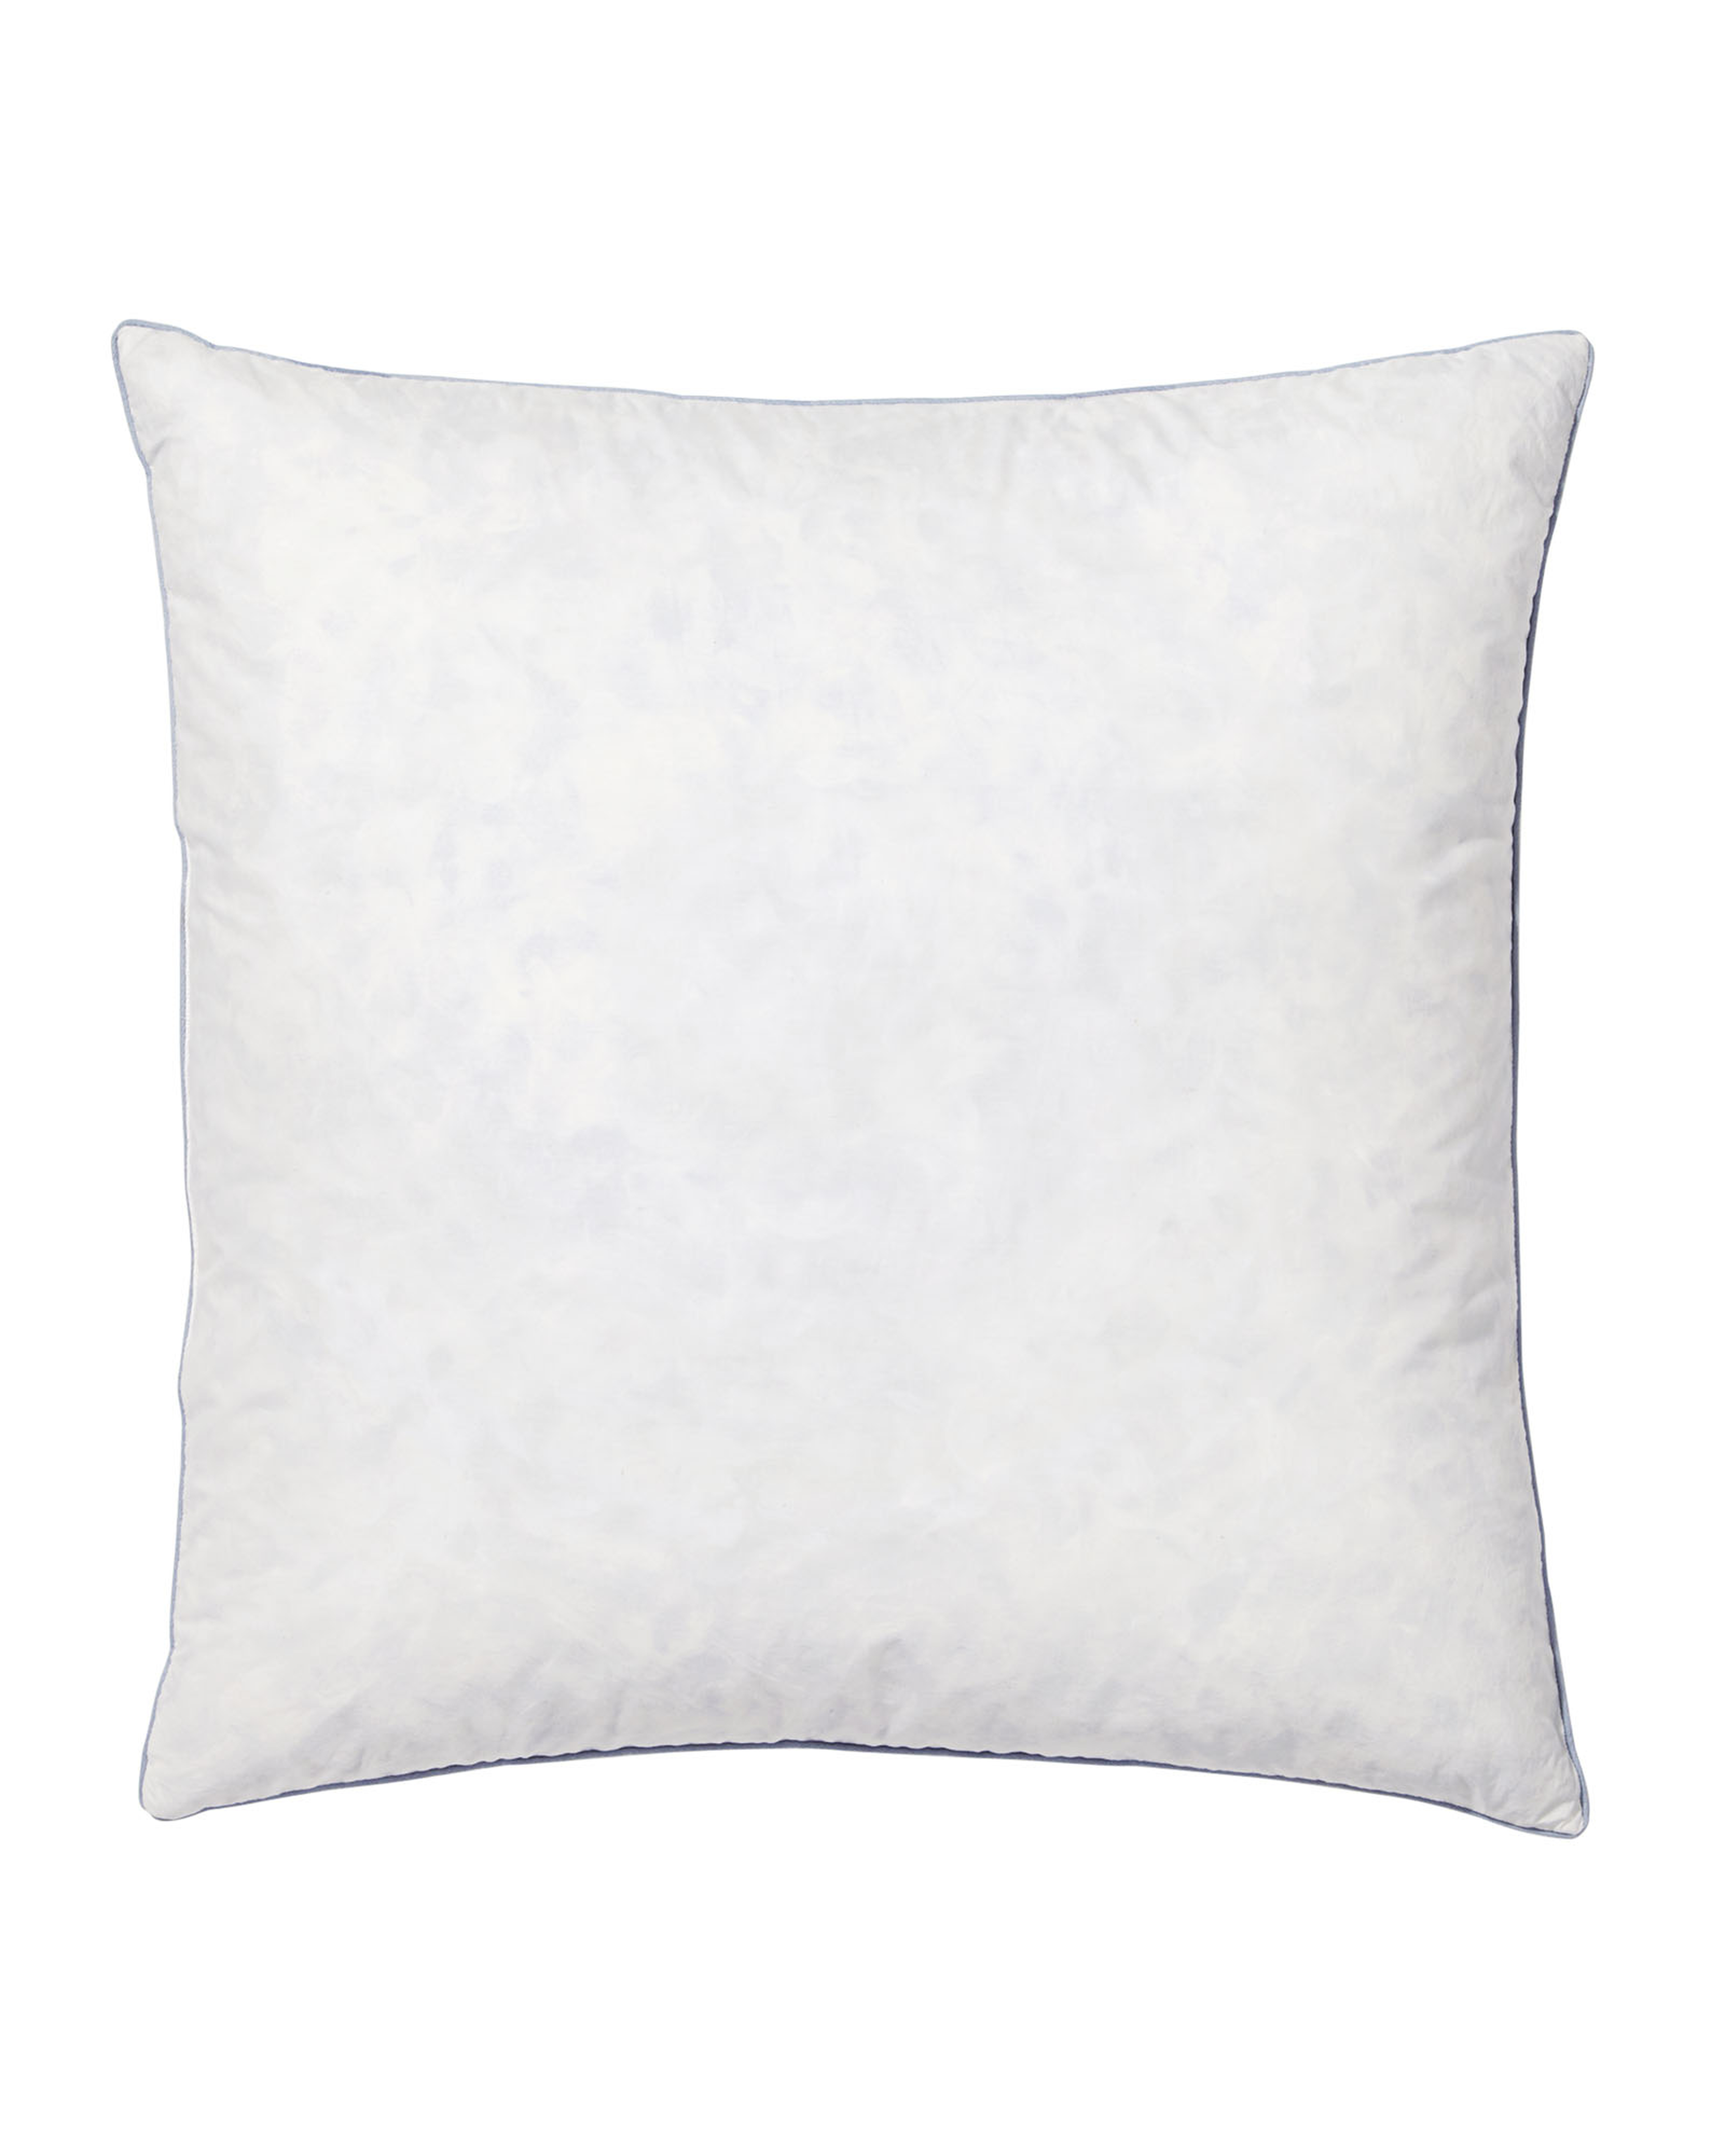 Pillow Insert - 24"SQ - Serena and Lily